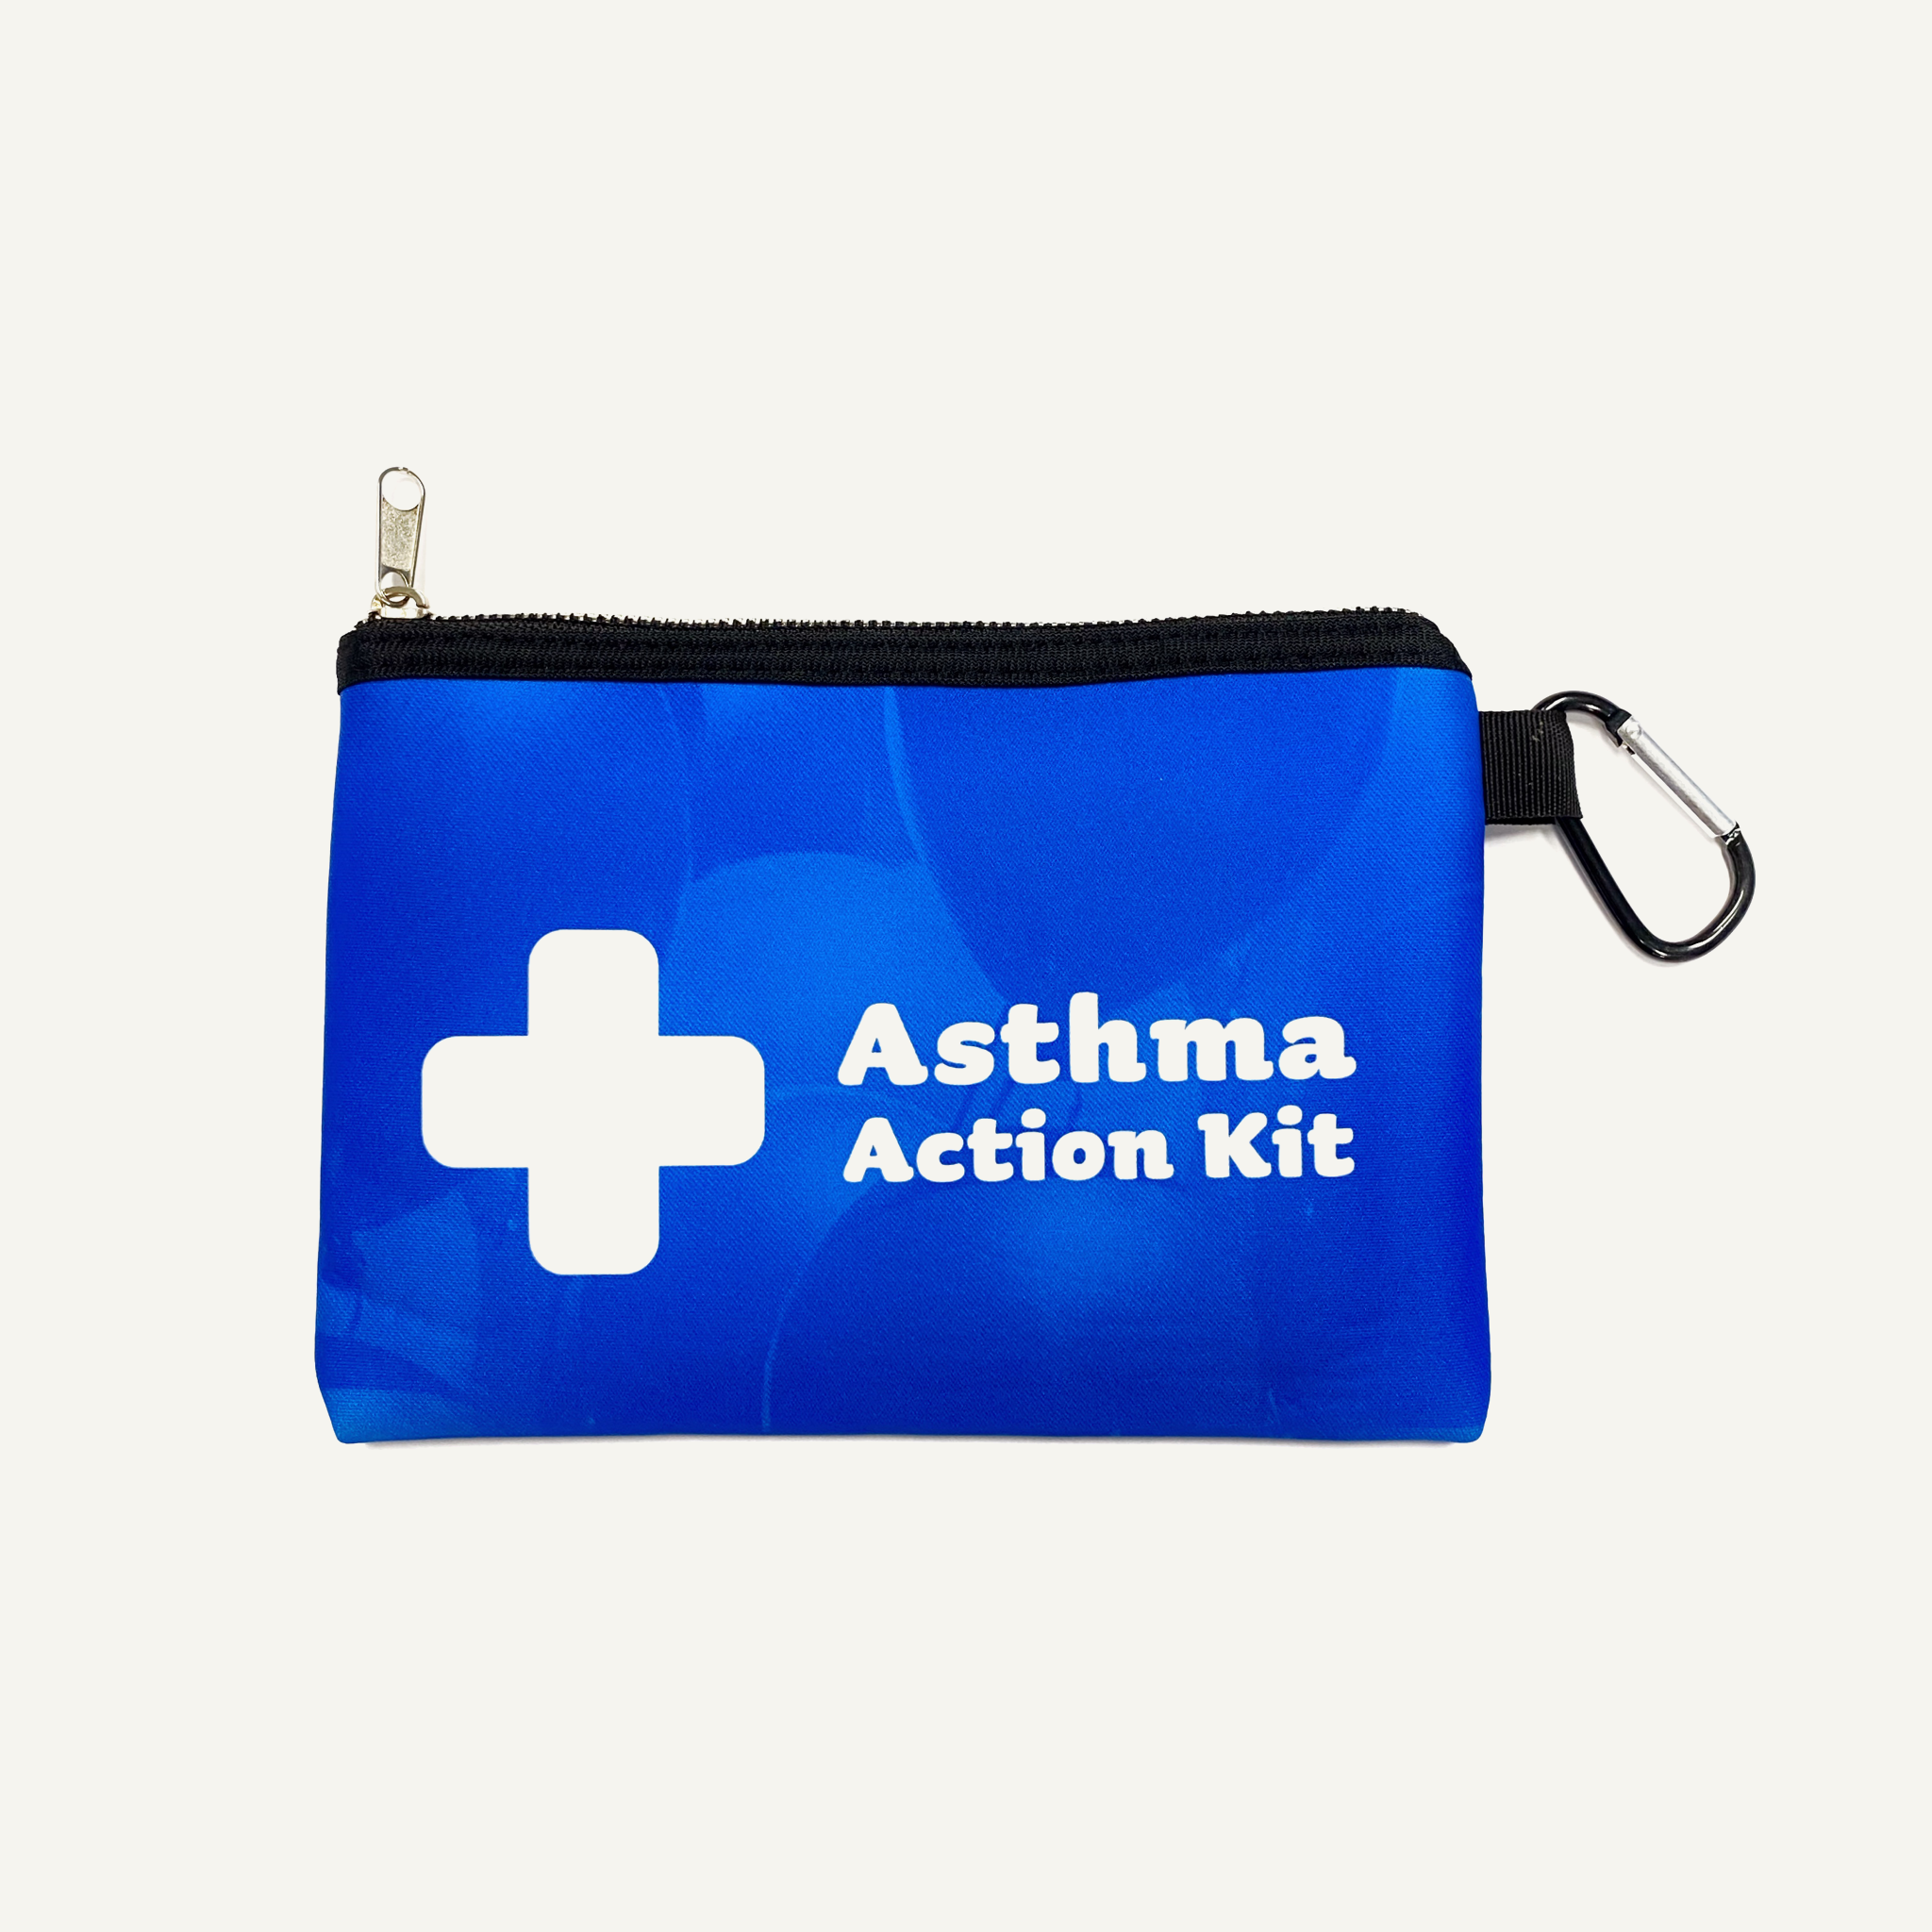 Asthma Action Kit - Bag Only